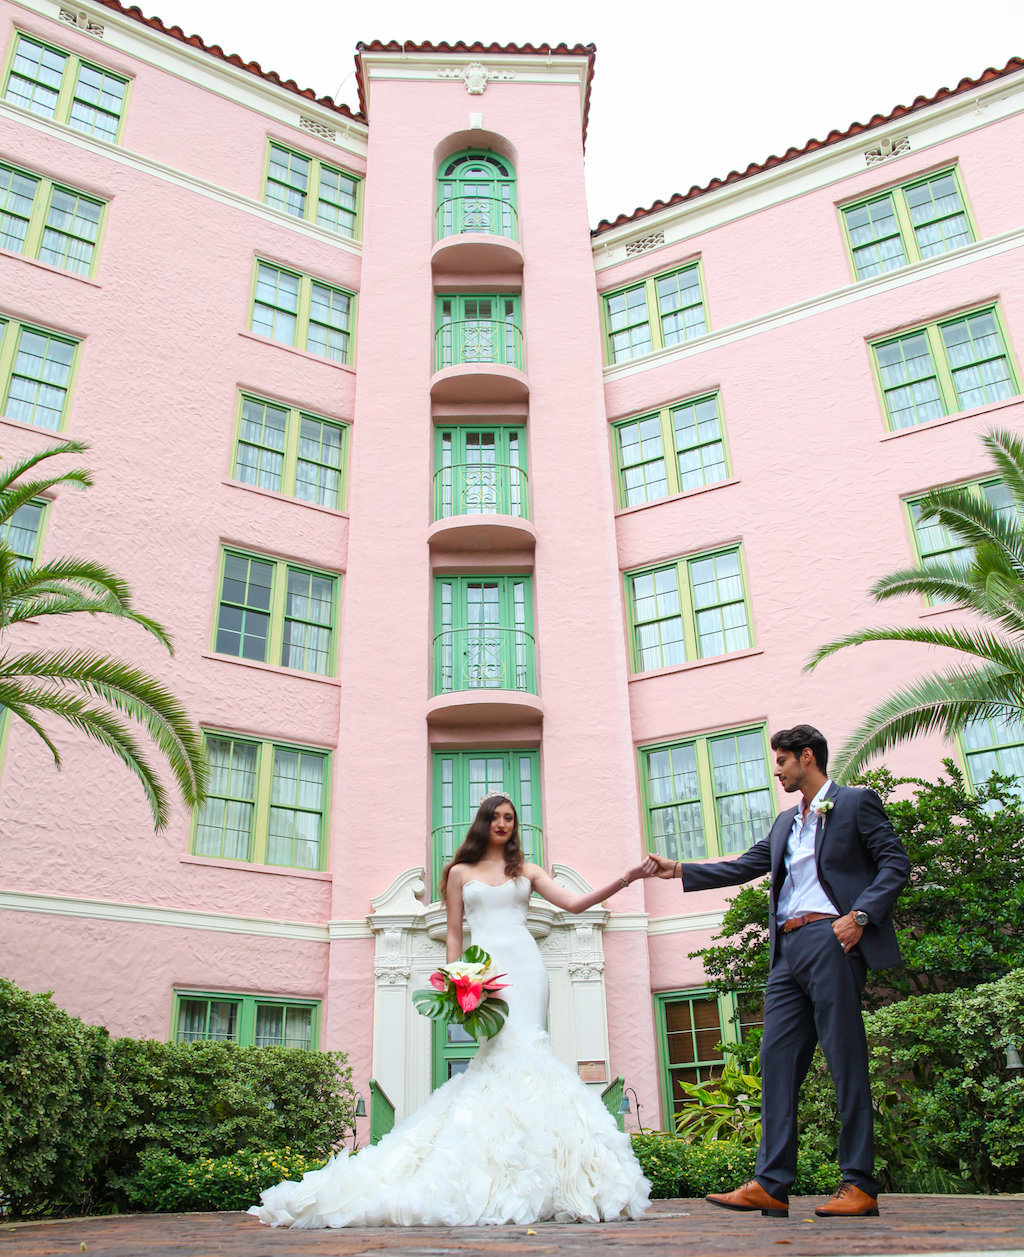 Outdoor Hotel Garden Wedding Portrait, Bride in Layered Mermaid Ines Di Santo Strapless Wedding Dress with Pink and White Lily with Green Fern Tropical Bouquet, Groom in Gray Suite with Boutonniere | St Petersburg FL Historic Venue Vinoy Renaissance